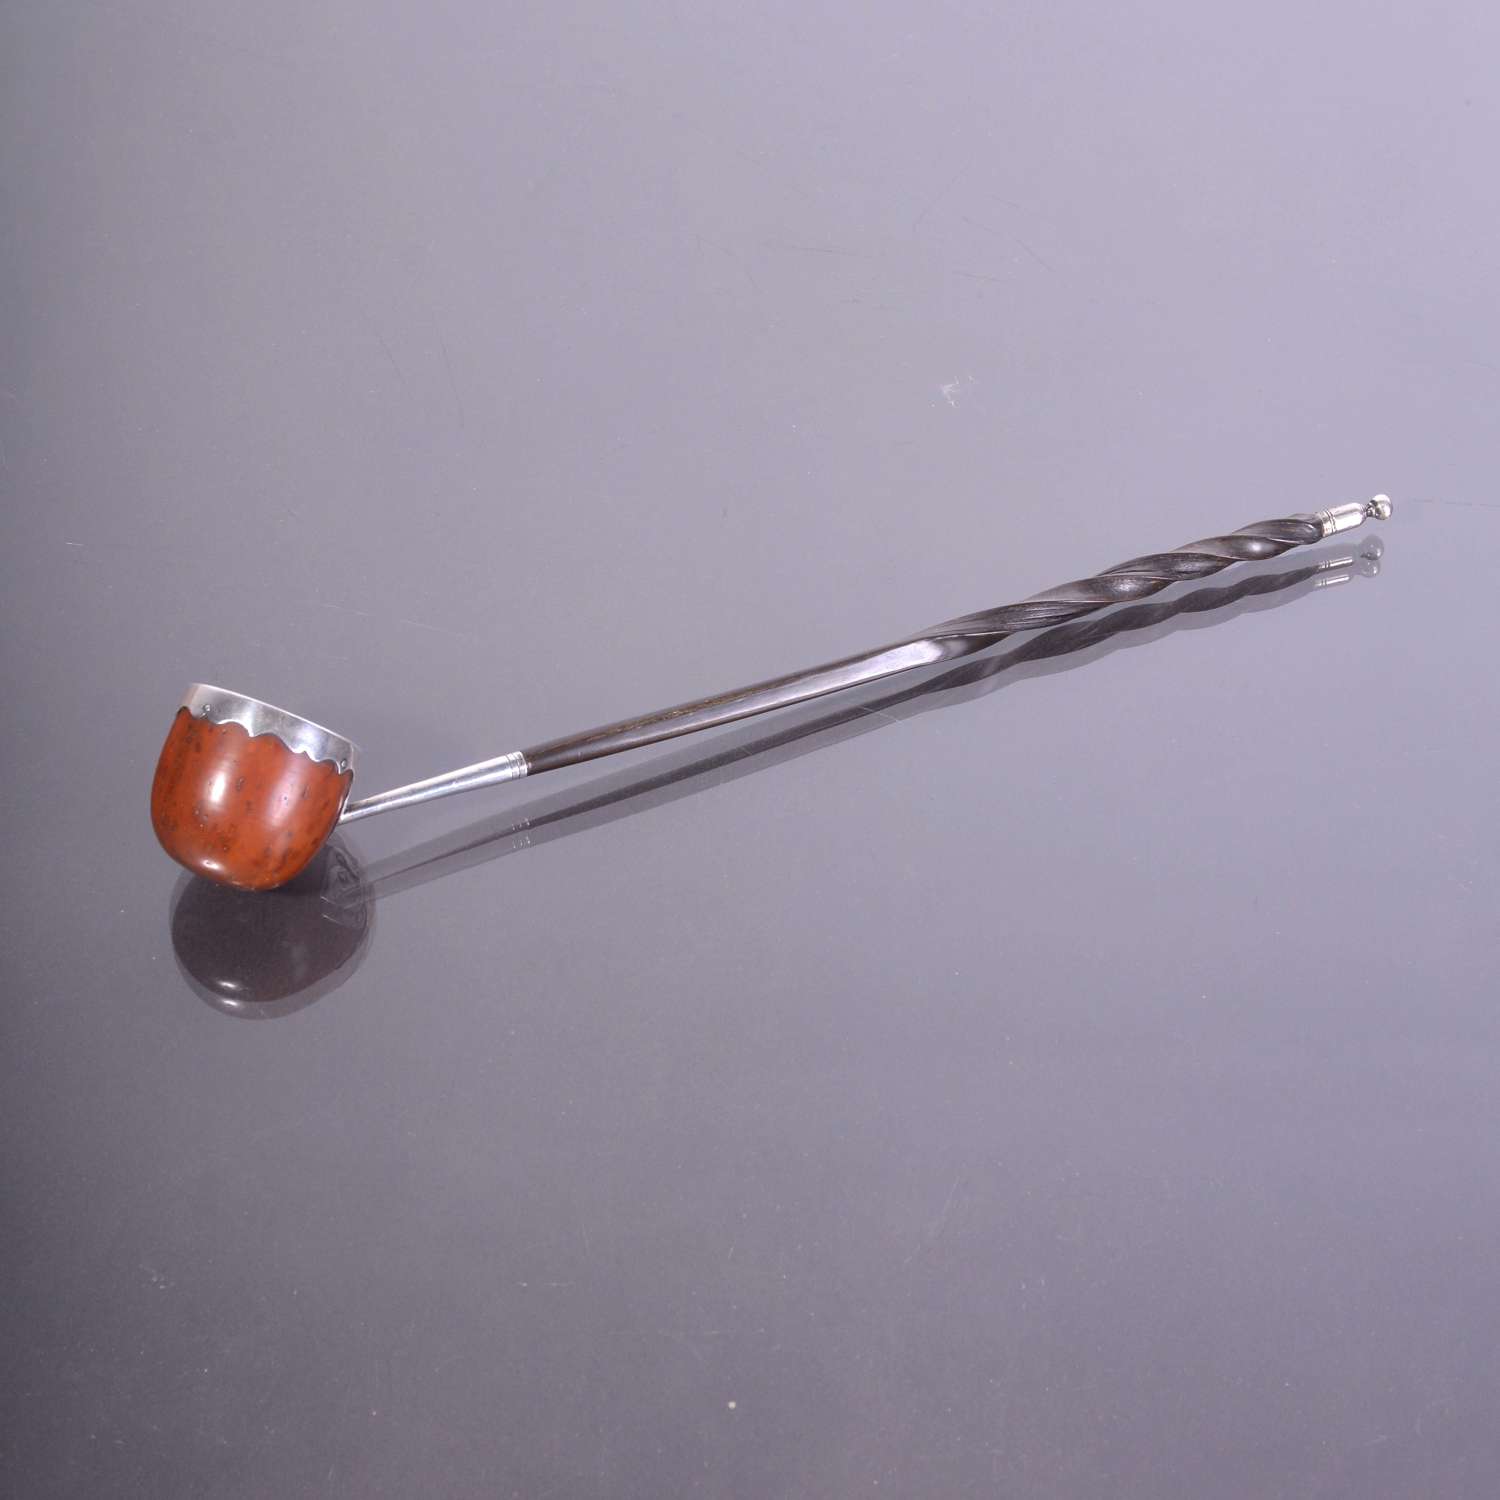 Antique Coquilla nut, silver and whalebone toddy or punch ladle